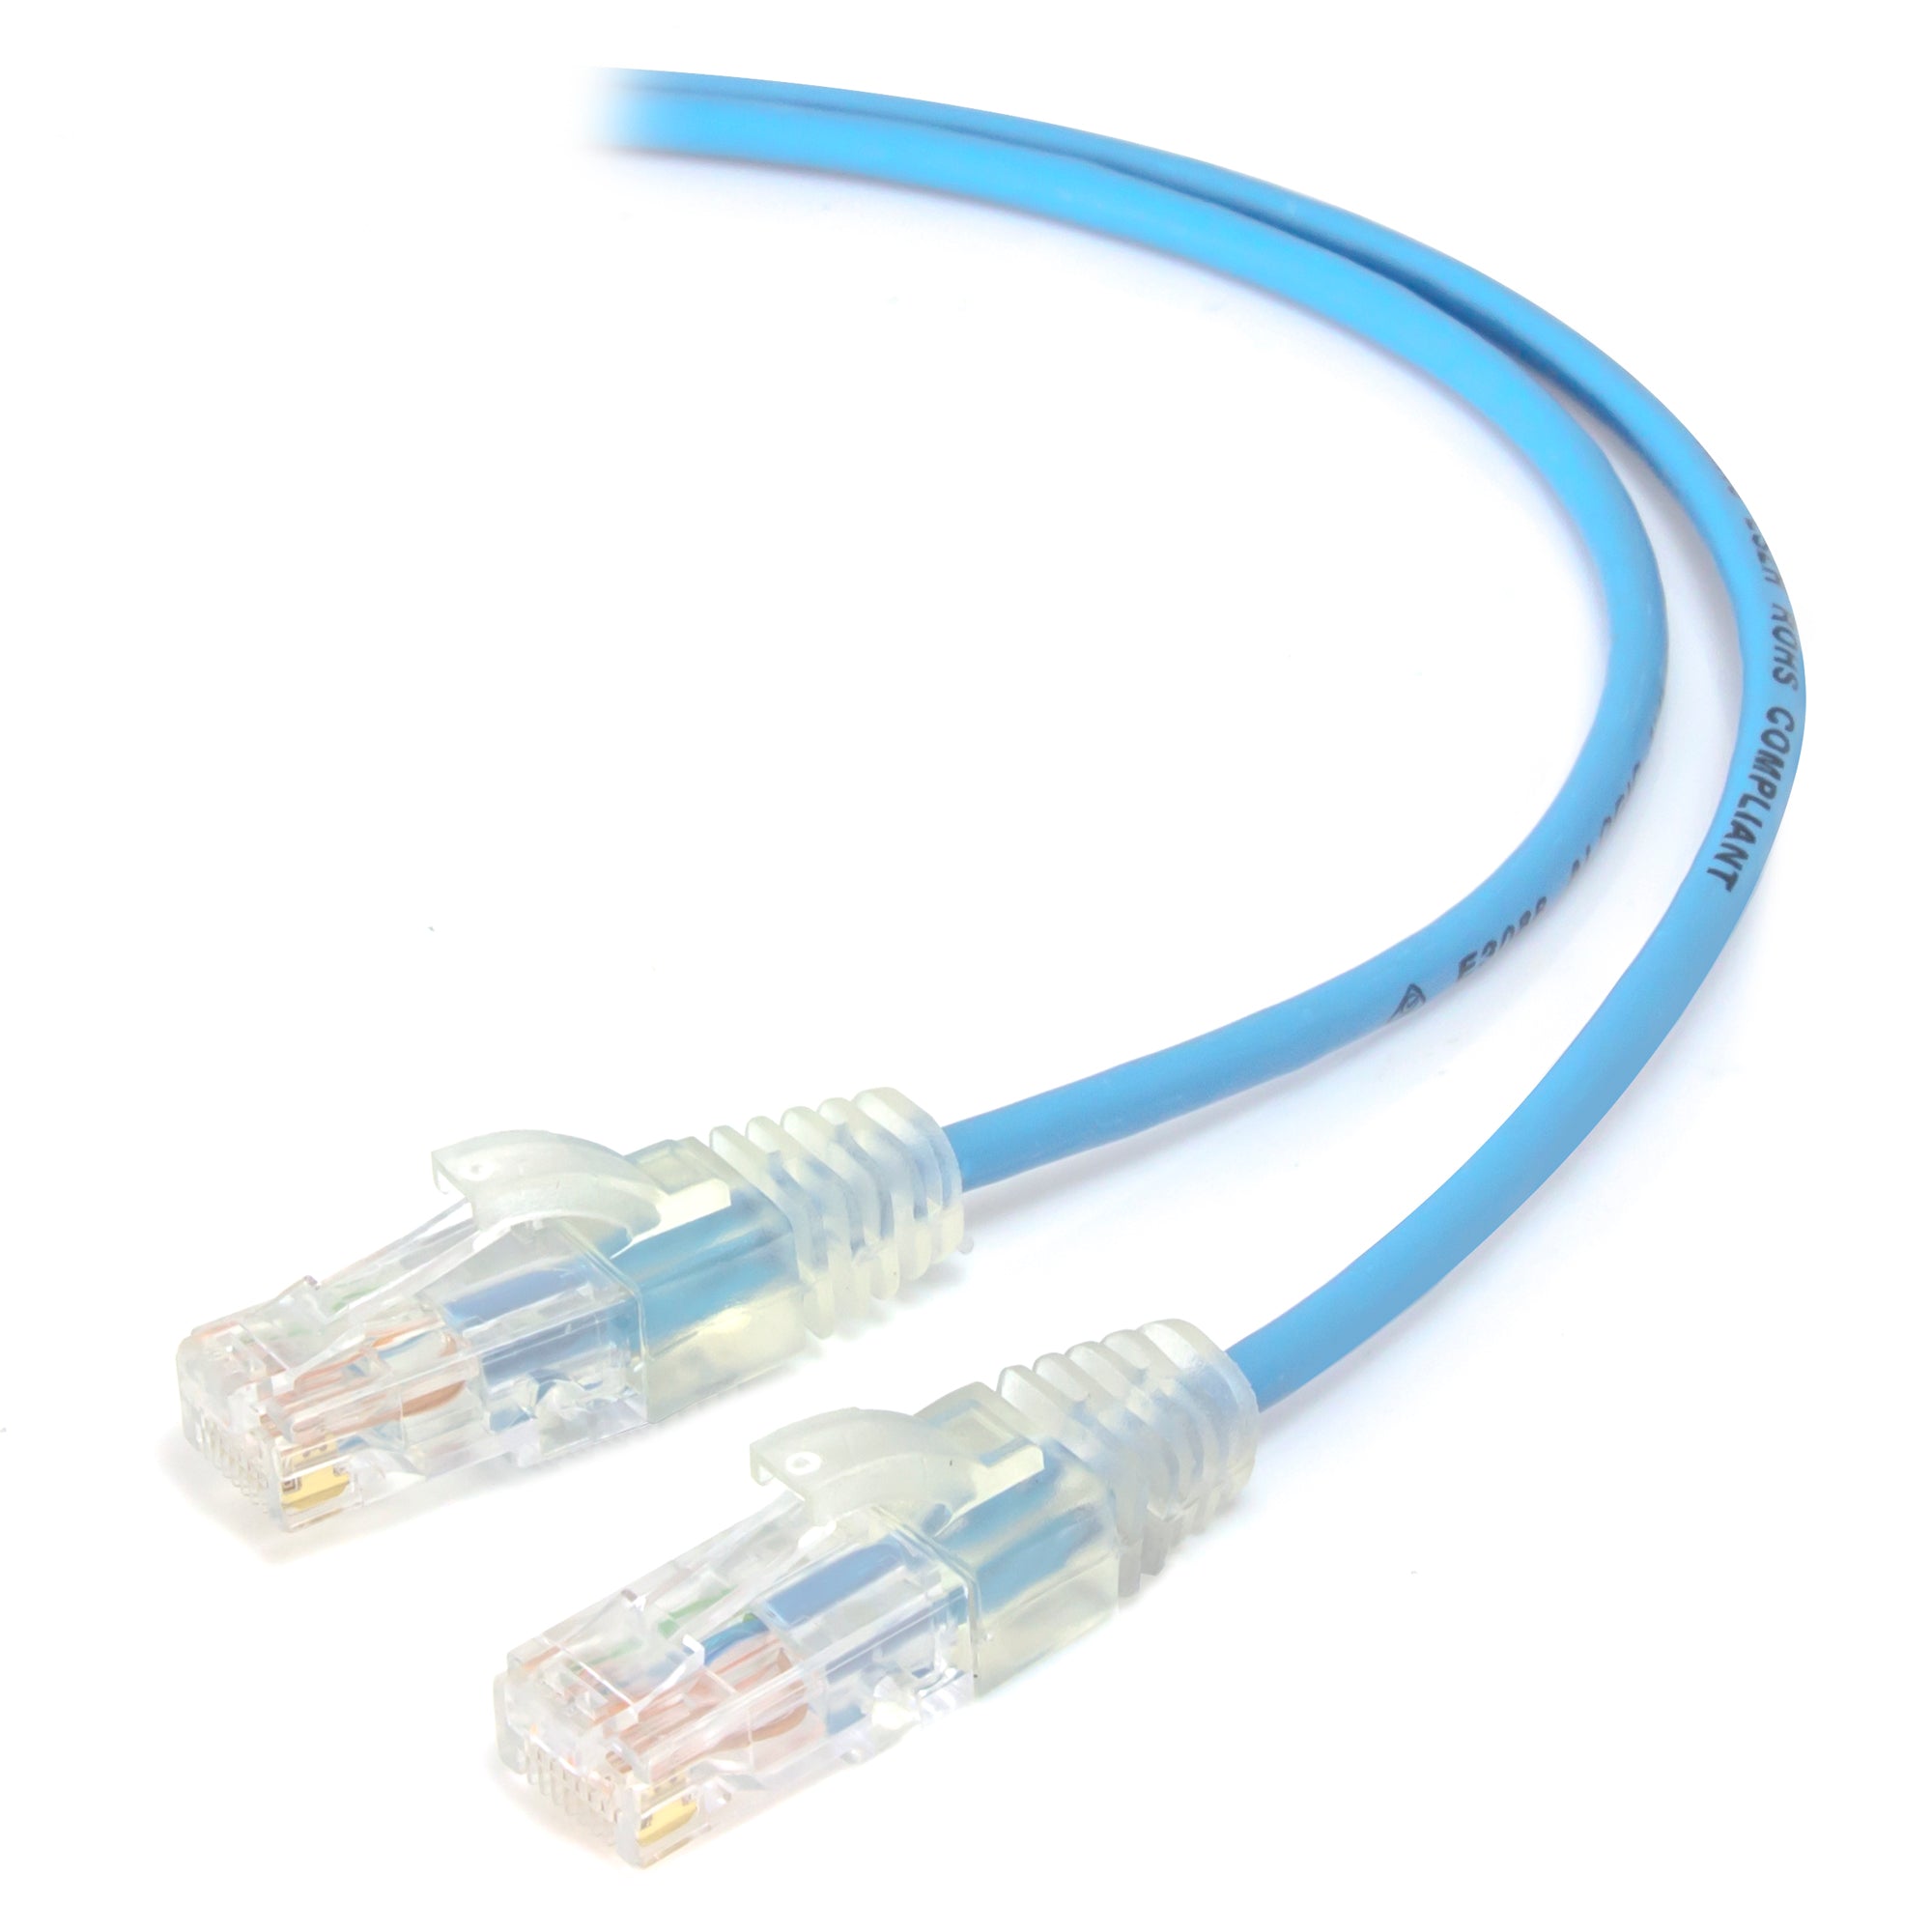 2m Blue Ultra Slim Cat6 Network Cable, UTP, 28AWG